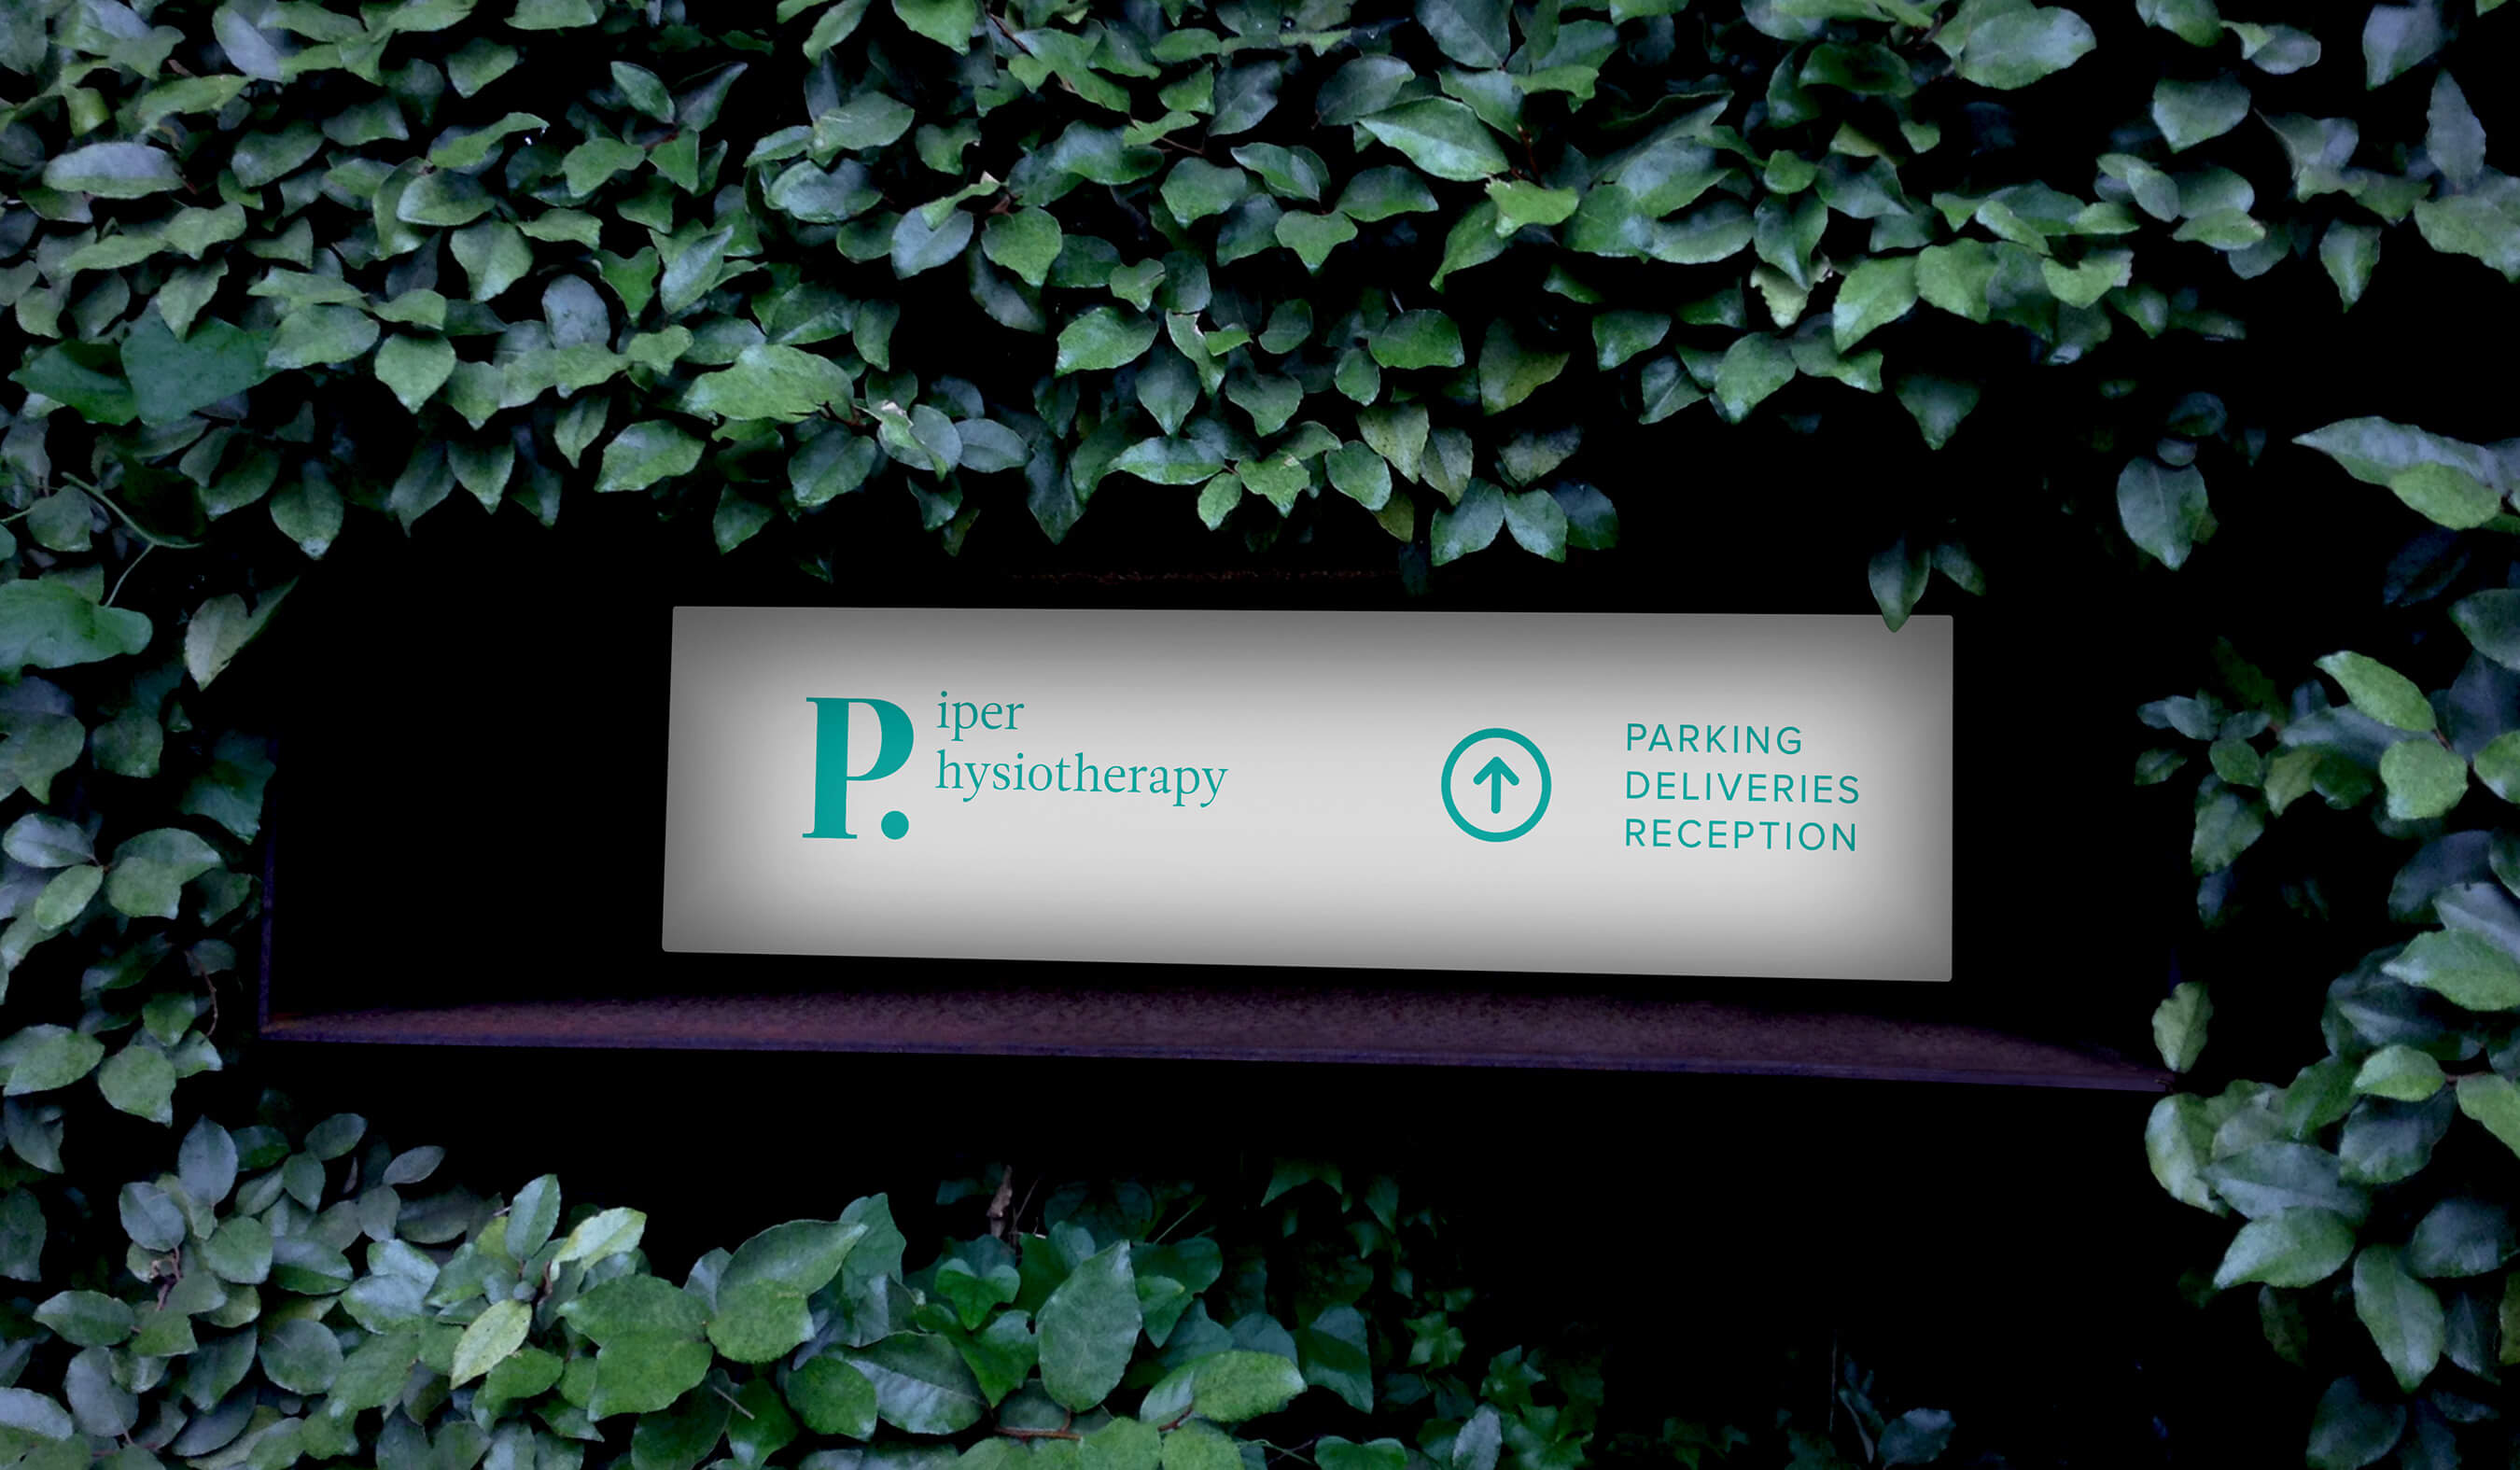 Physiotherapy brand wayfinding in car park